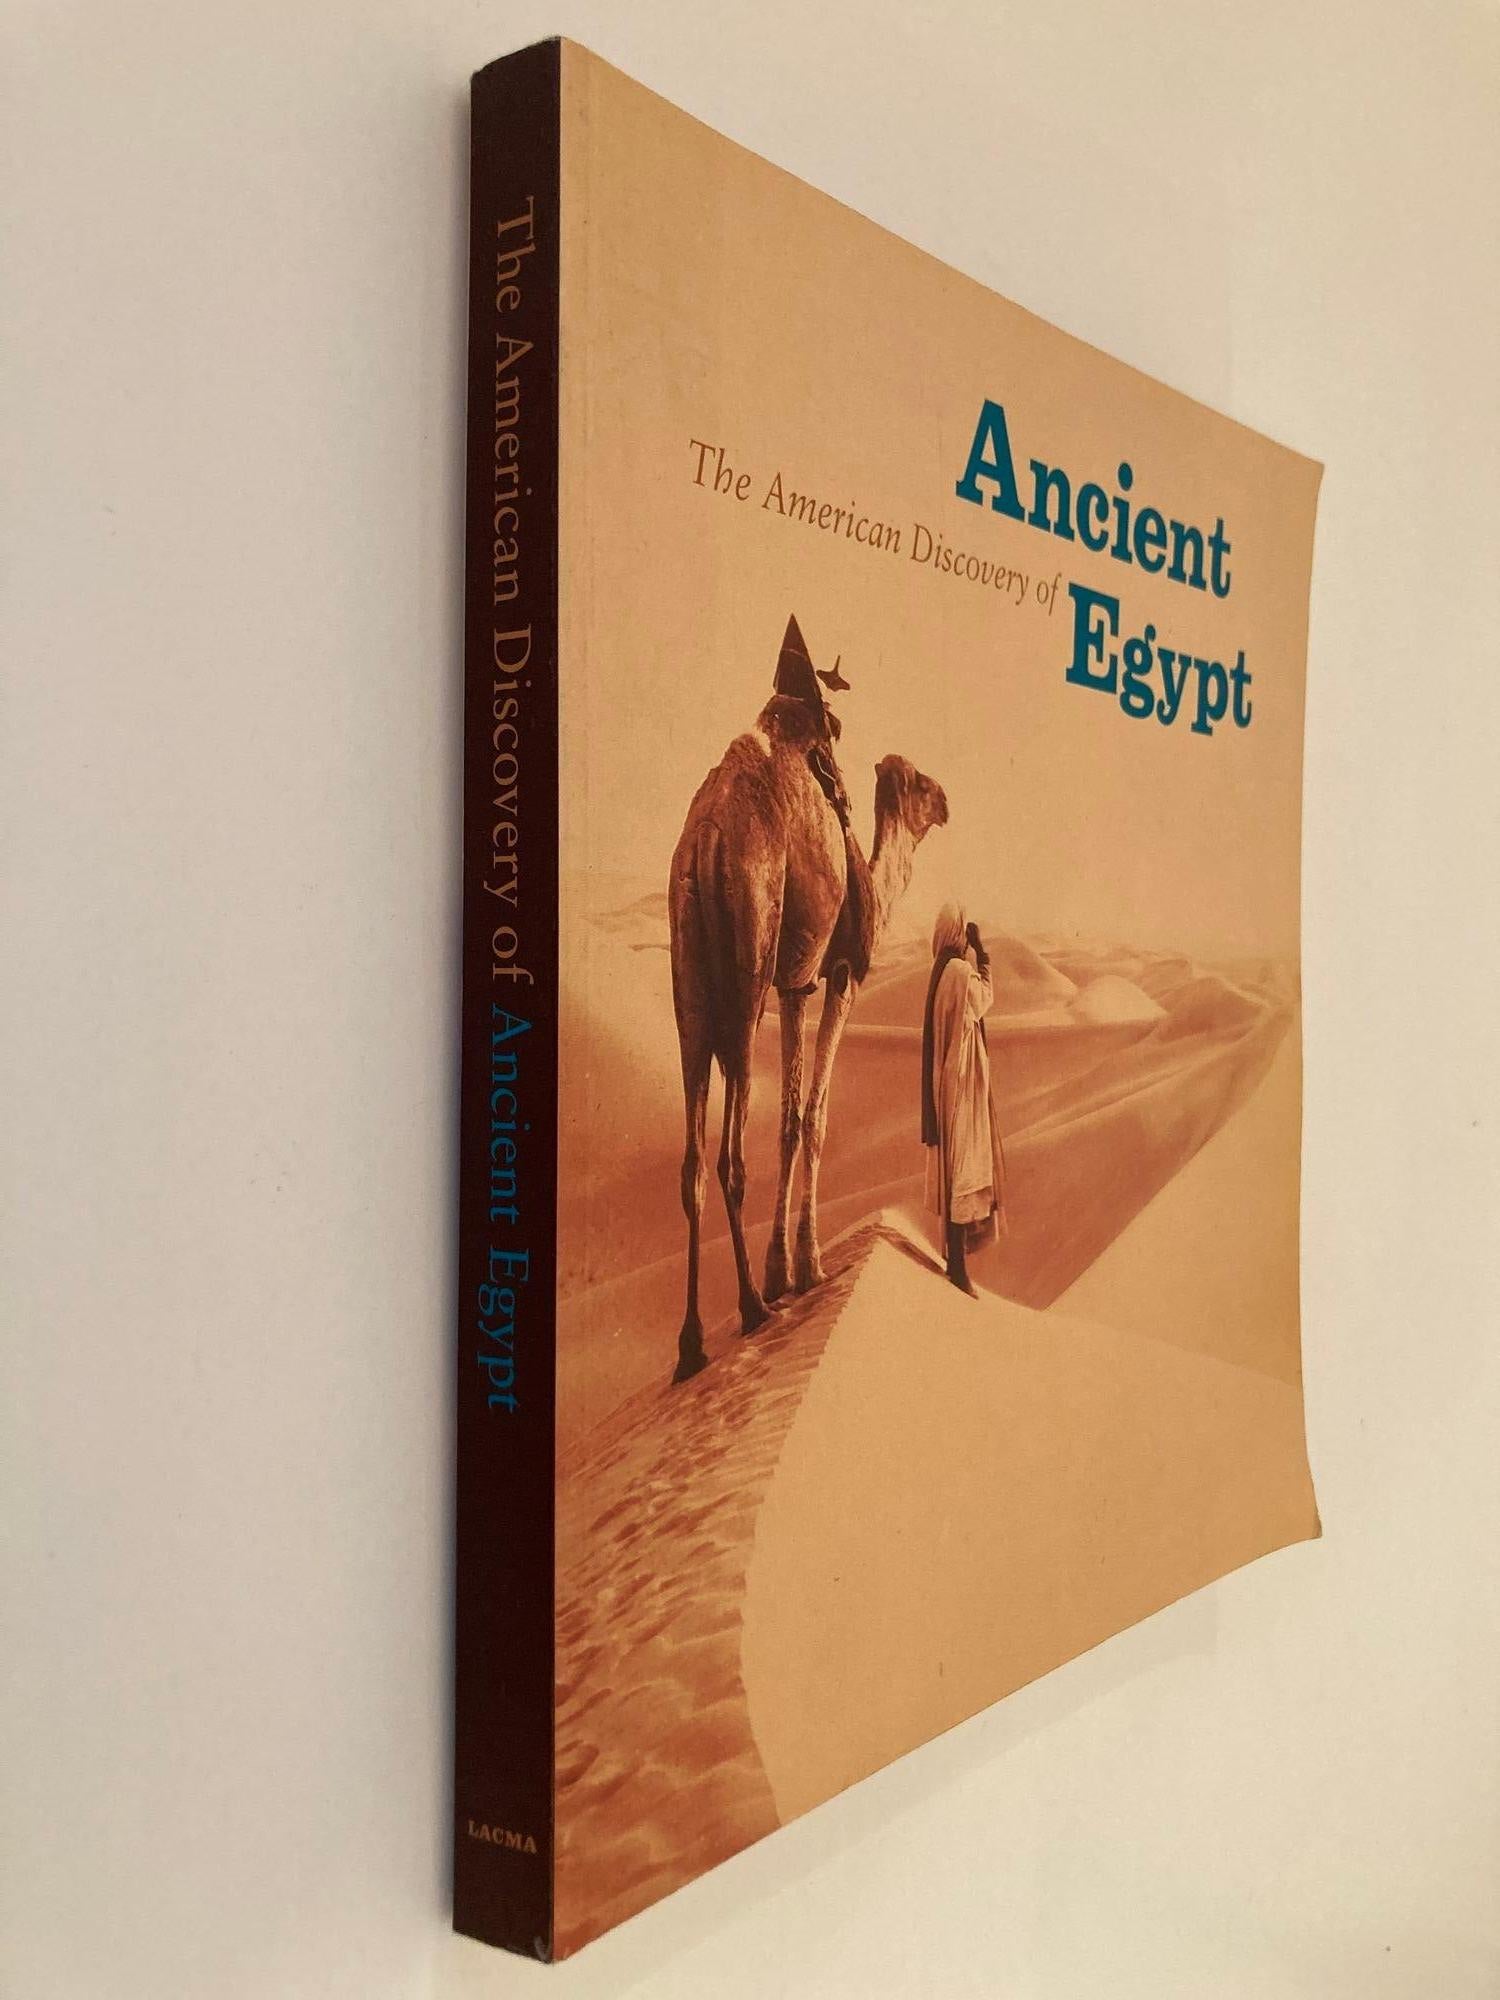 The American Discovery of Ancient Egypt 1995.
Essays, edited by Nancy Thomas.
A survey of the achievements of American Egyptology featuring such enterprising US archaeologists as George Reisner, James Henry Breasted and Herbert Winlock, whose